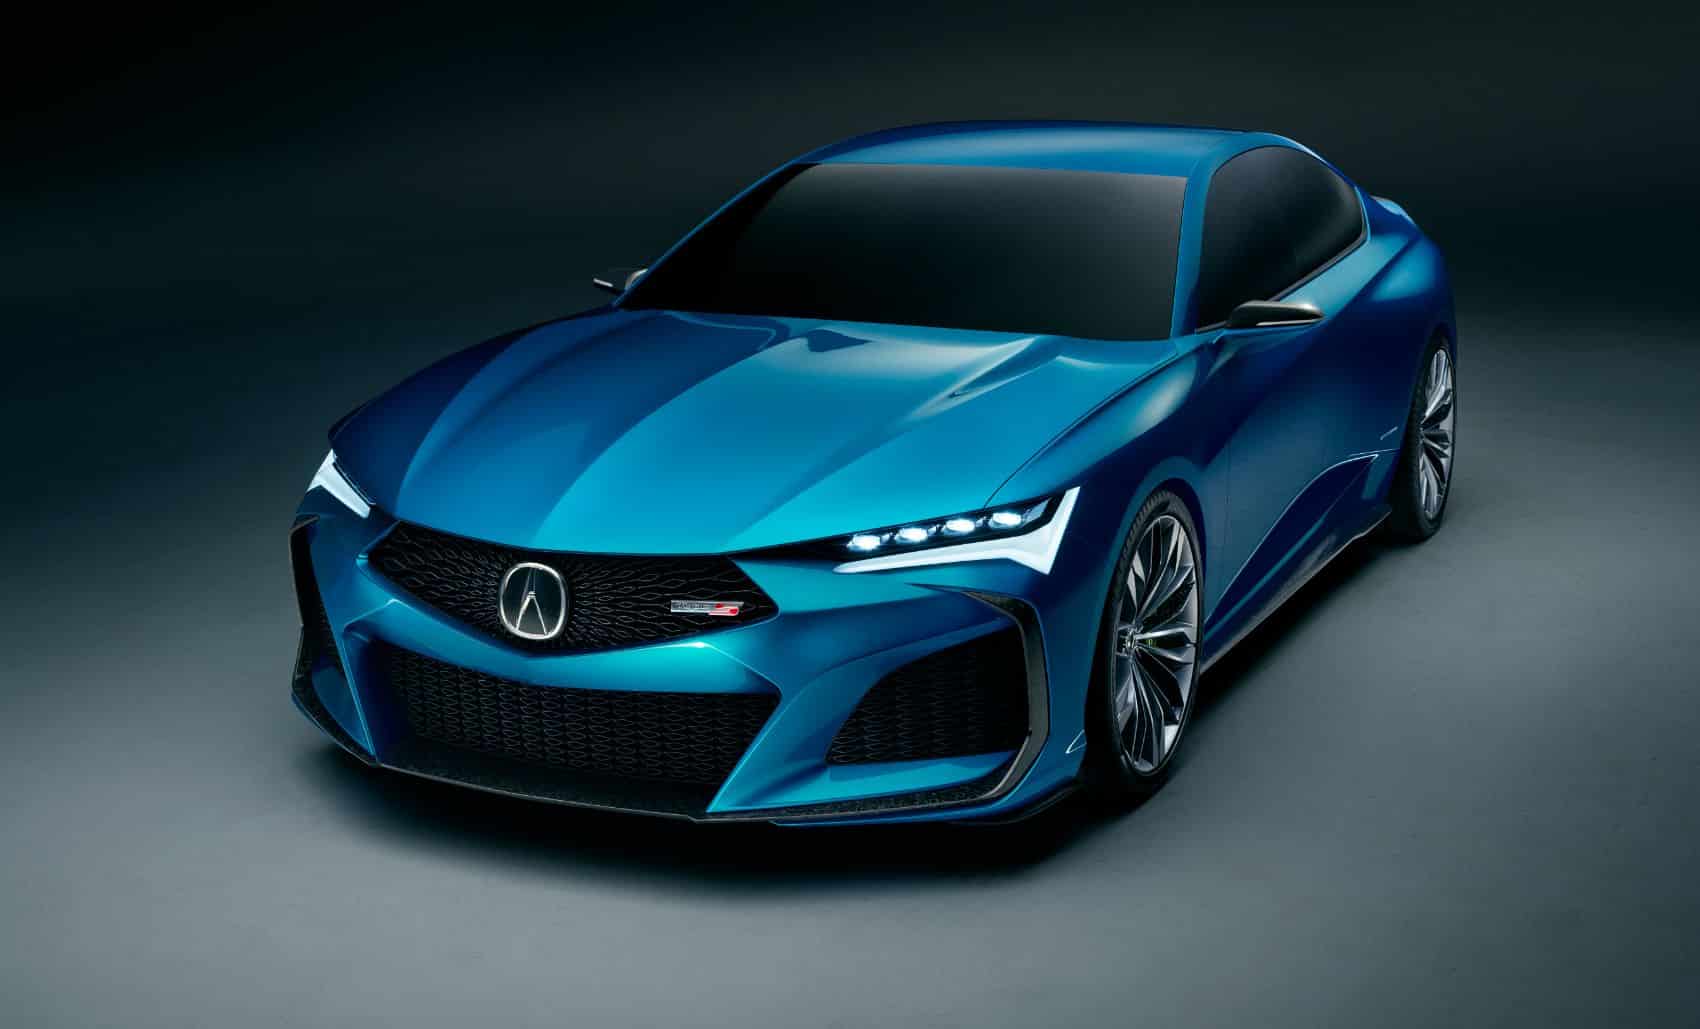 2020 Acura Tl Release Date and Concept